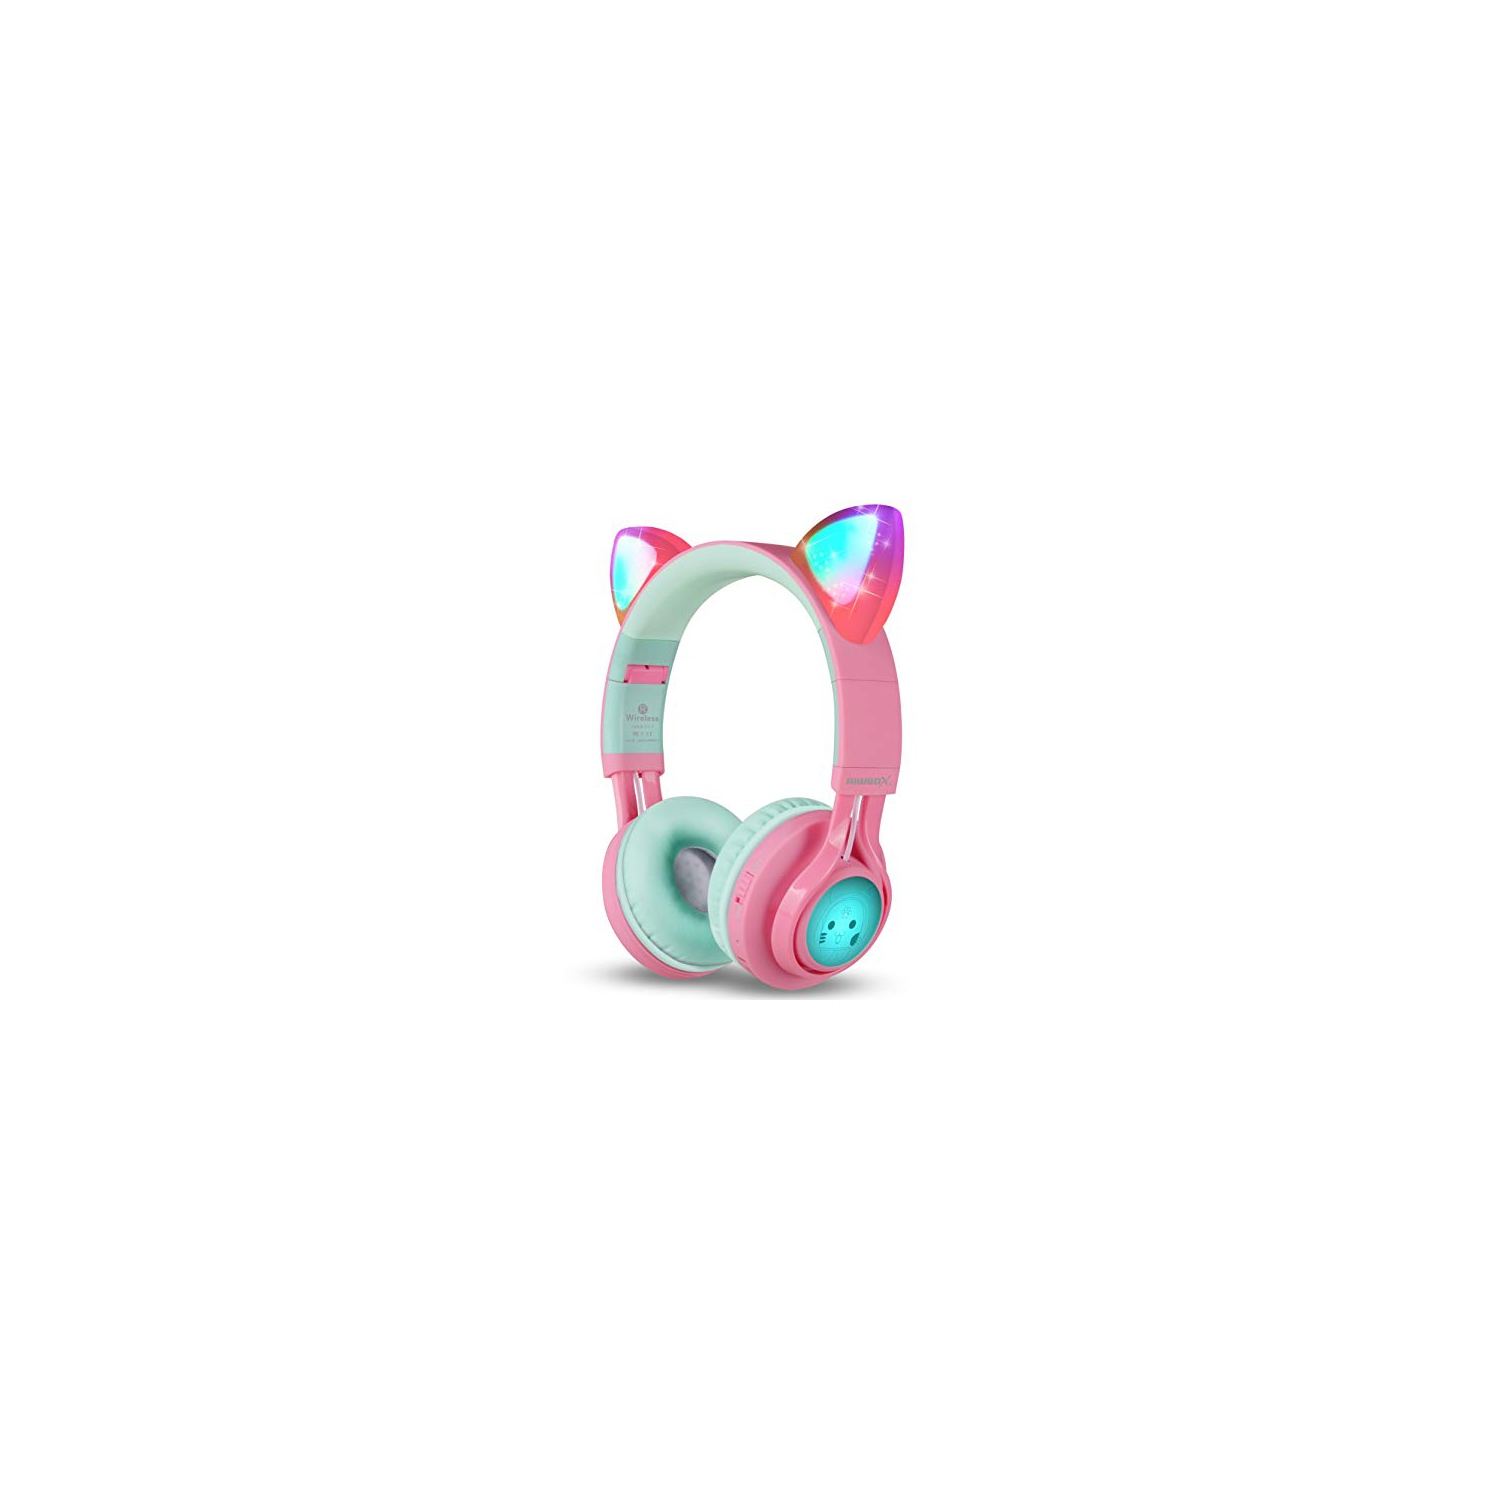 CT-7 Cat Ear Bluetooth Headphones, LED Light Up Bluetooth Wireless Over Ear Headphones with Microphone and Volume Control for iPhone/iPad/Smartphones/Laptop/PC/TV (Pink&Green)